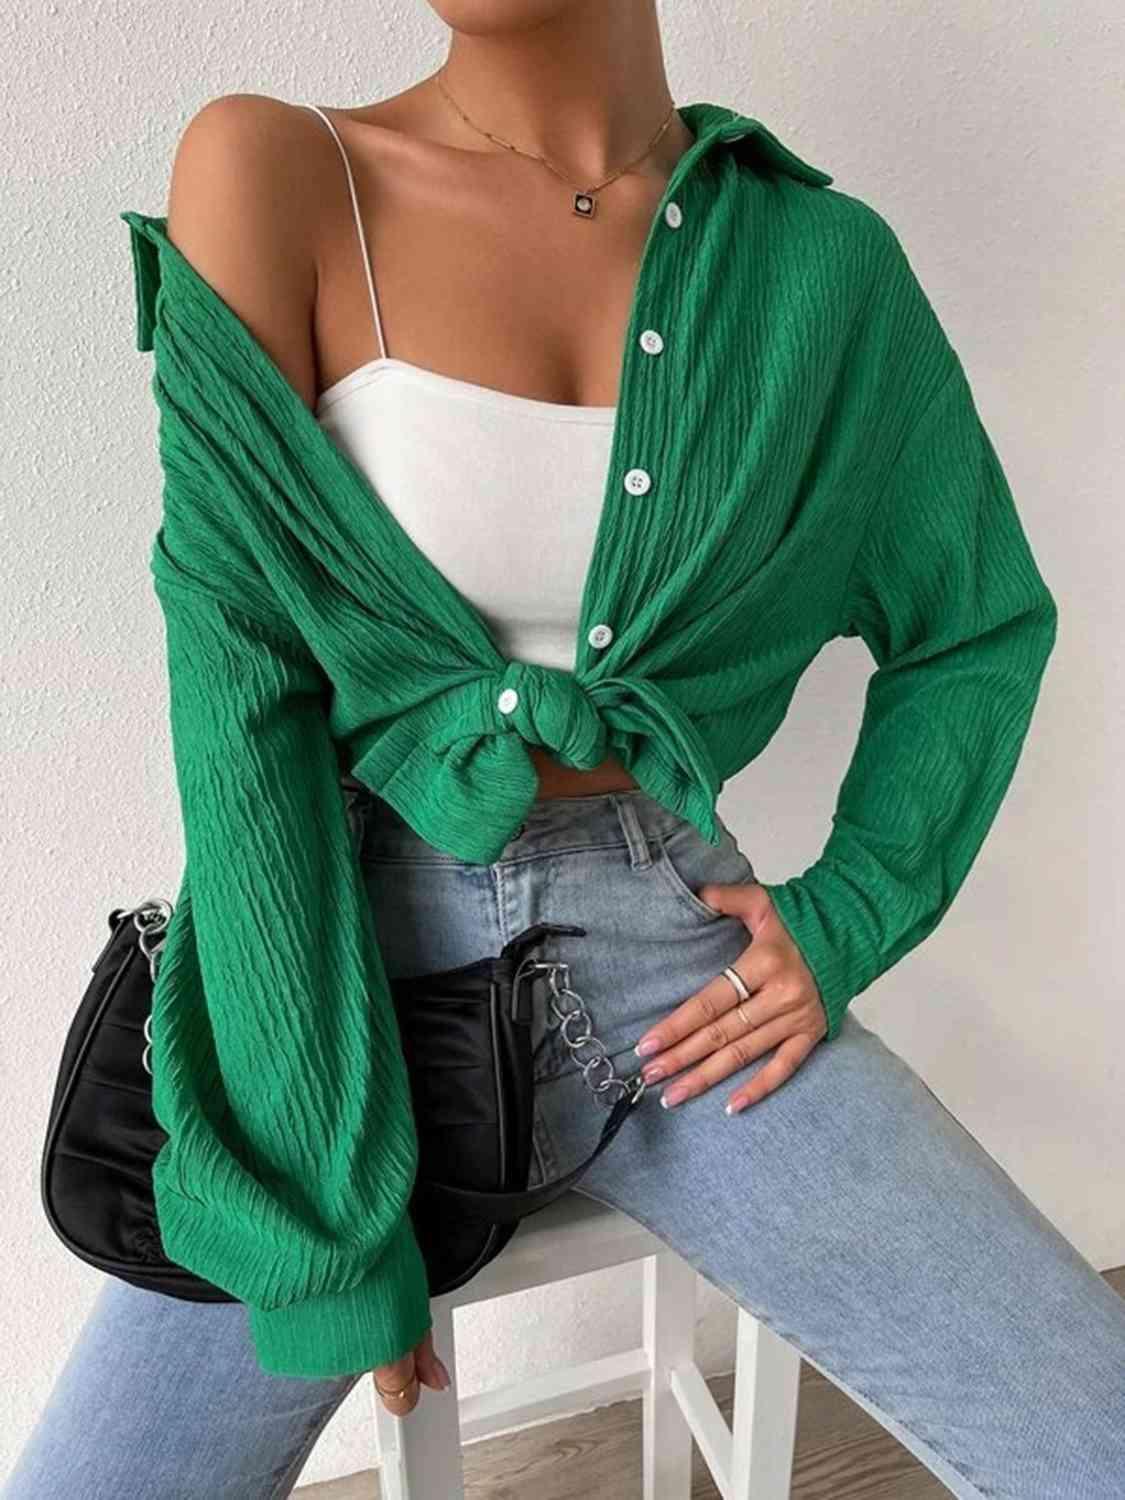 a woman sitting on a chair wearing a green sweater